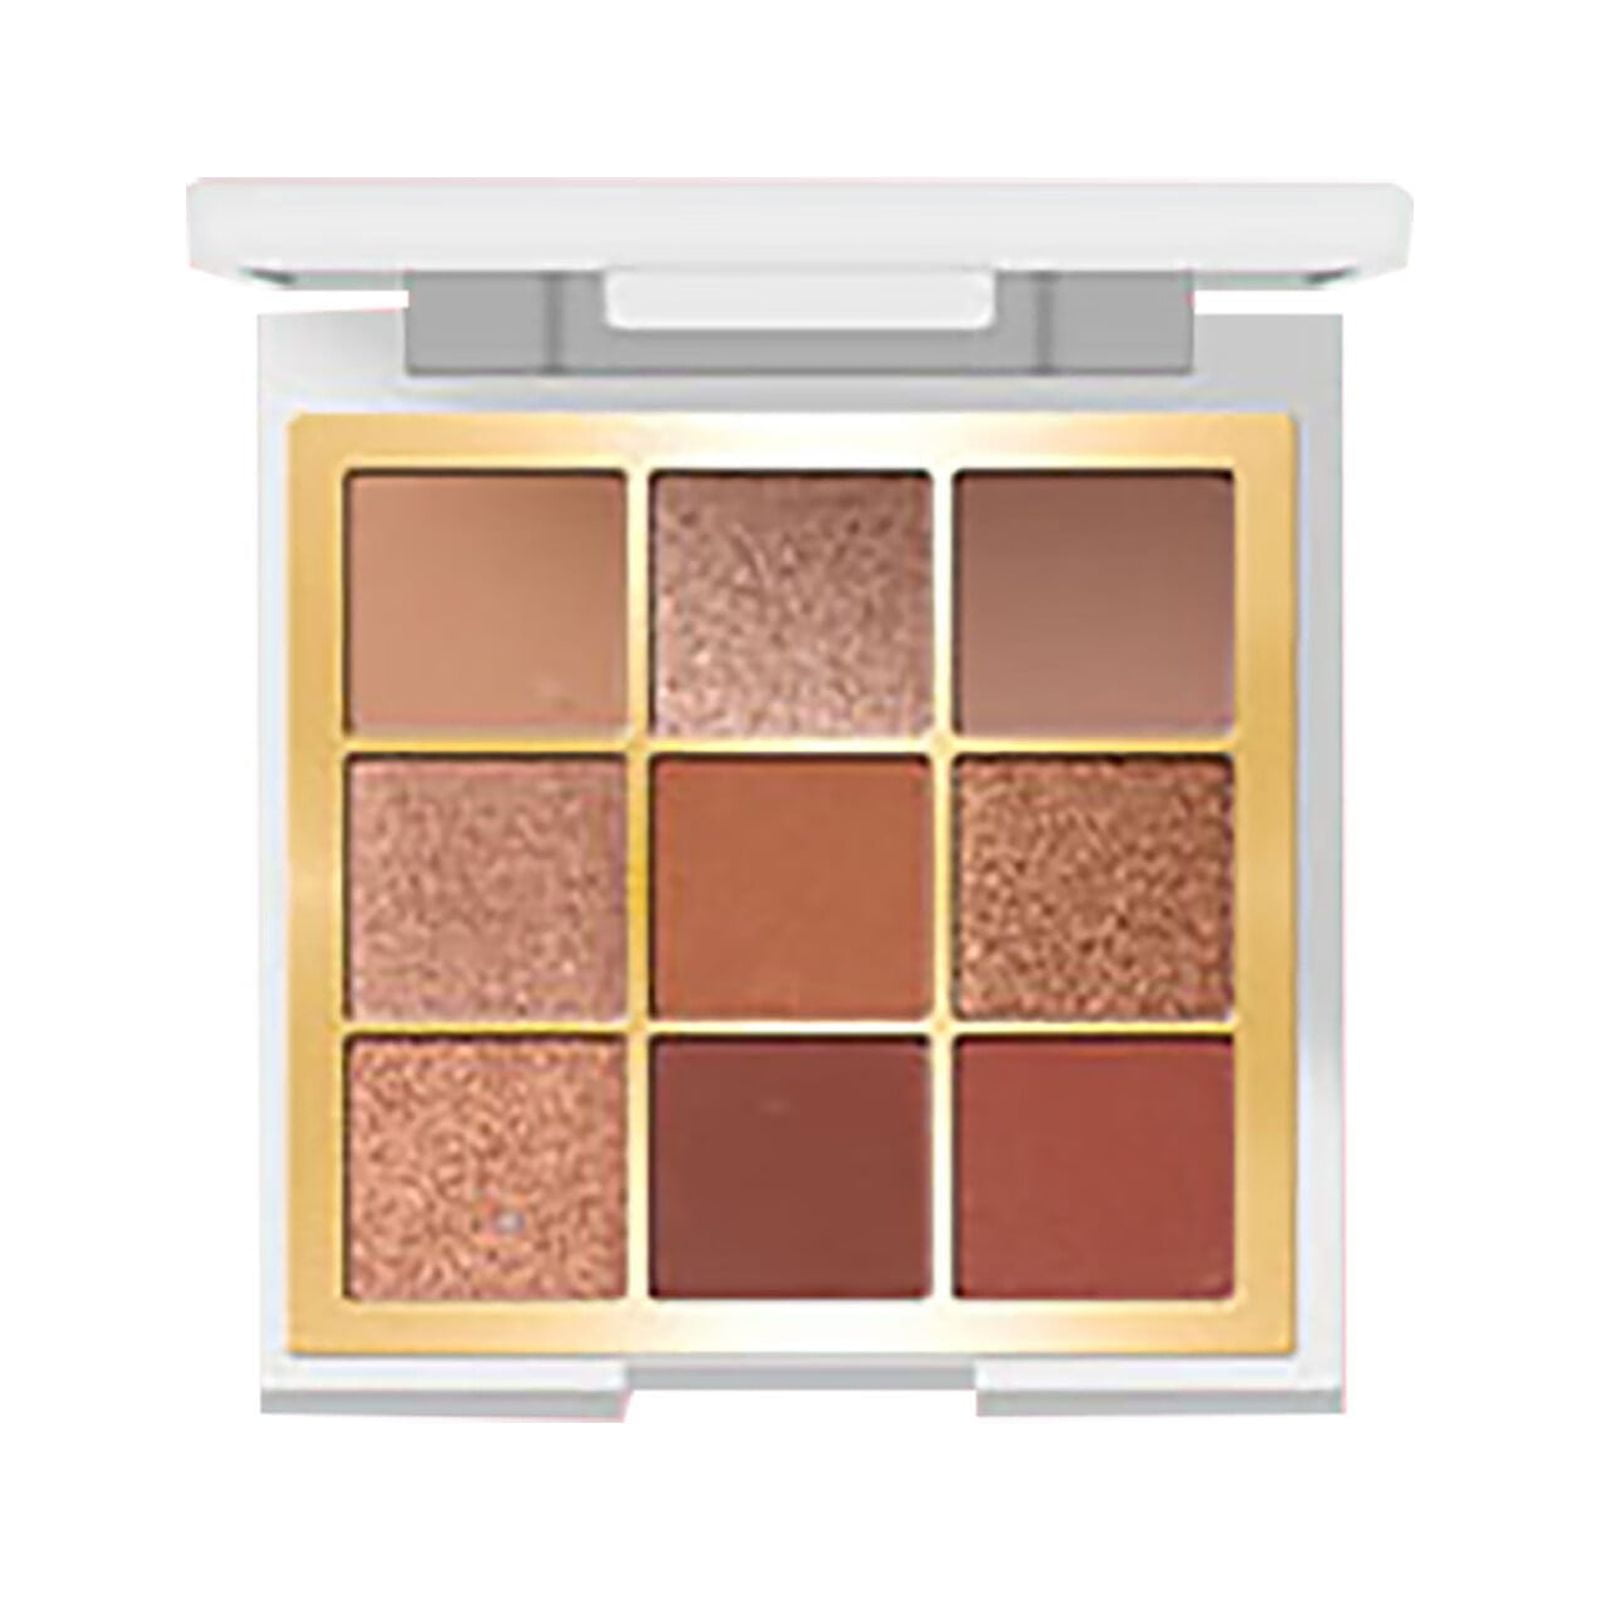 Ultra A Texture Rich Color And Velvet Eyeshadow Mirror Great Set for Christmas Taupe Includes Abs Neutral Makeup And Gifts Eyeshadow Brown Travel Shades Blending